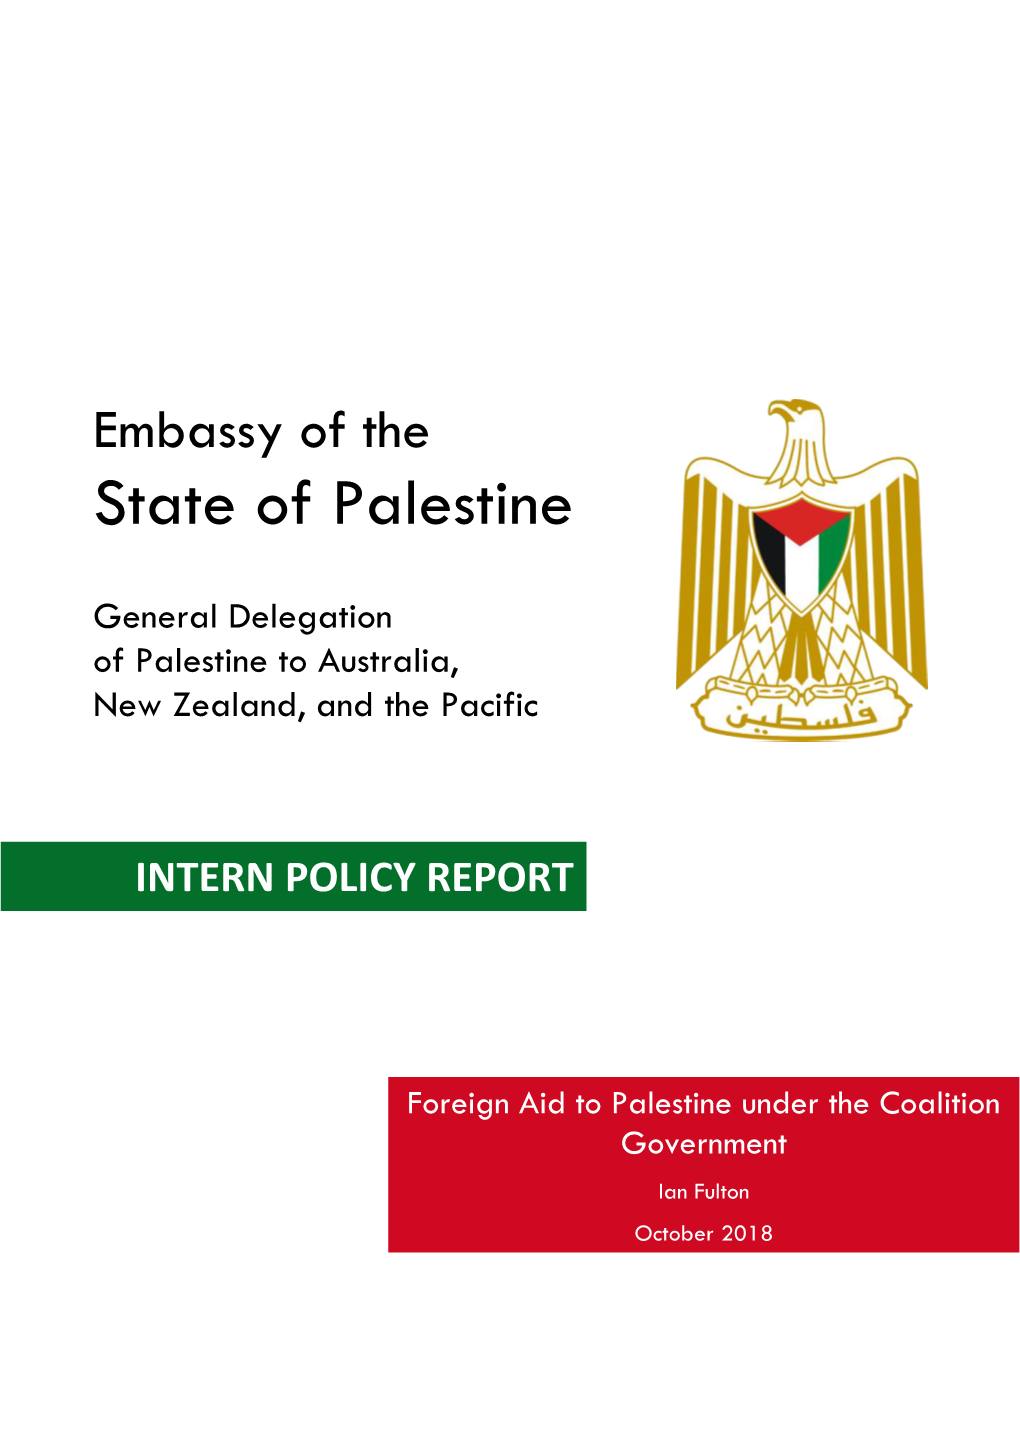 Foreign Aid to Palestine Under the Coalition Government